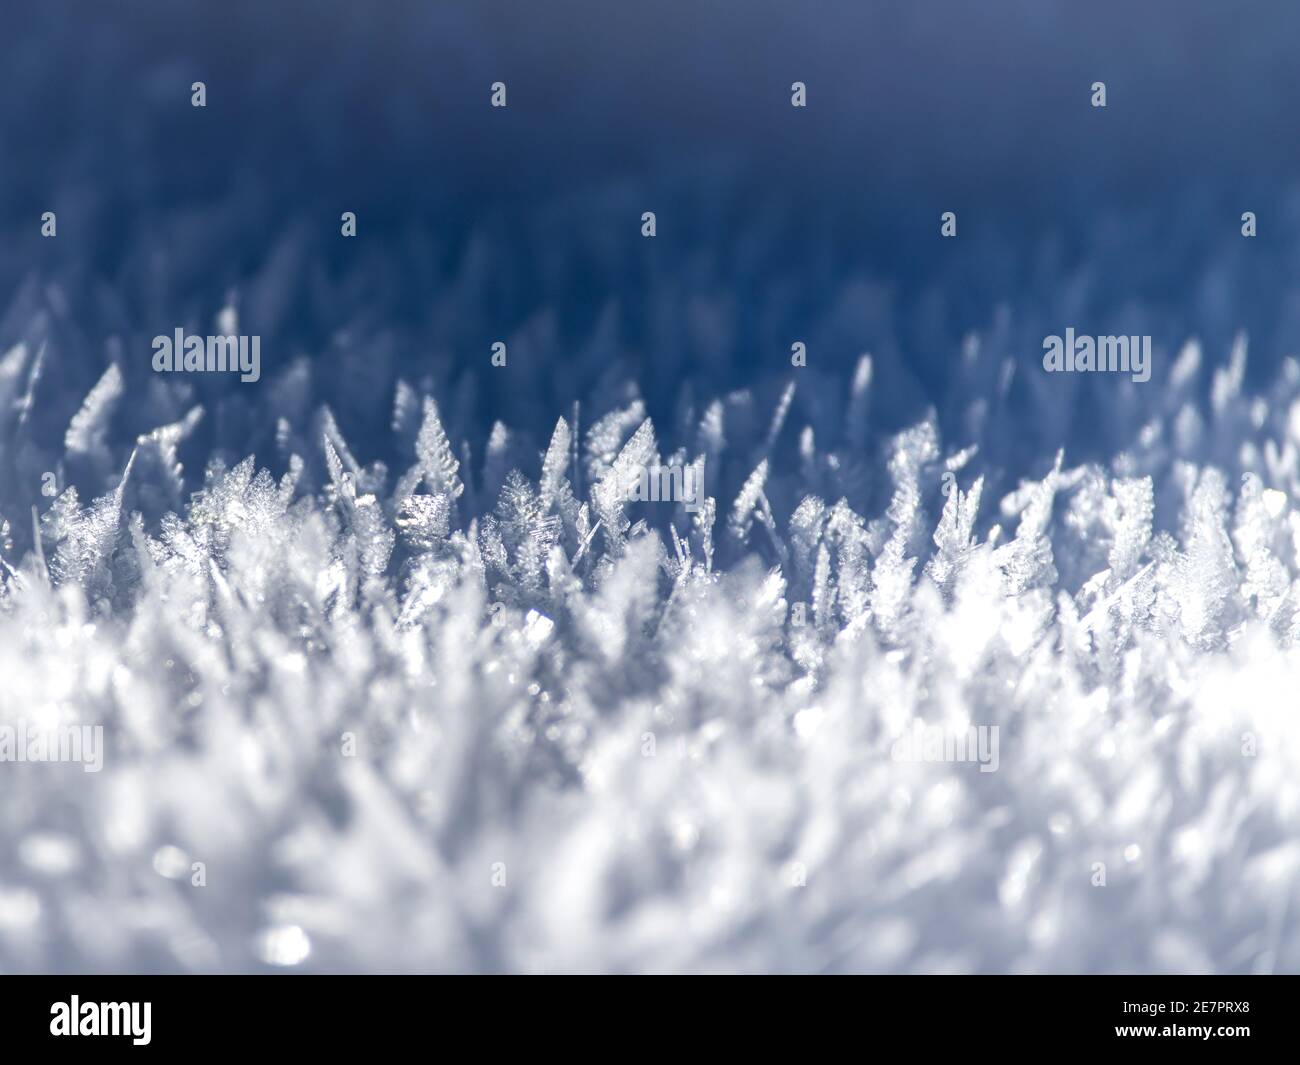 Abstract white and blue background of frozen snowflakes Stock Photo